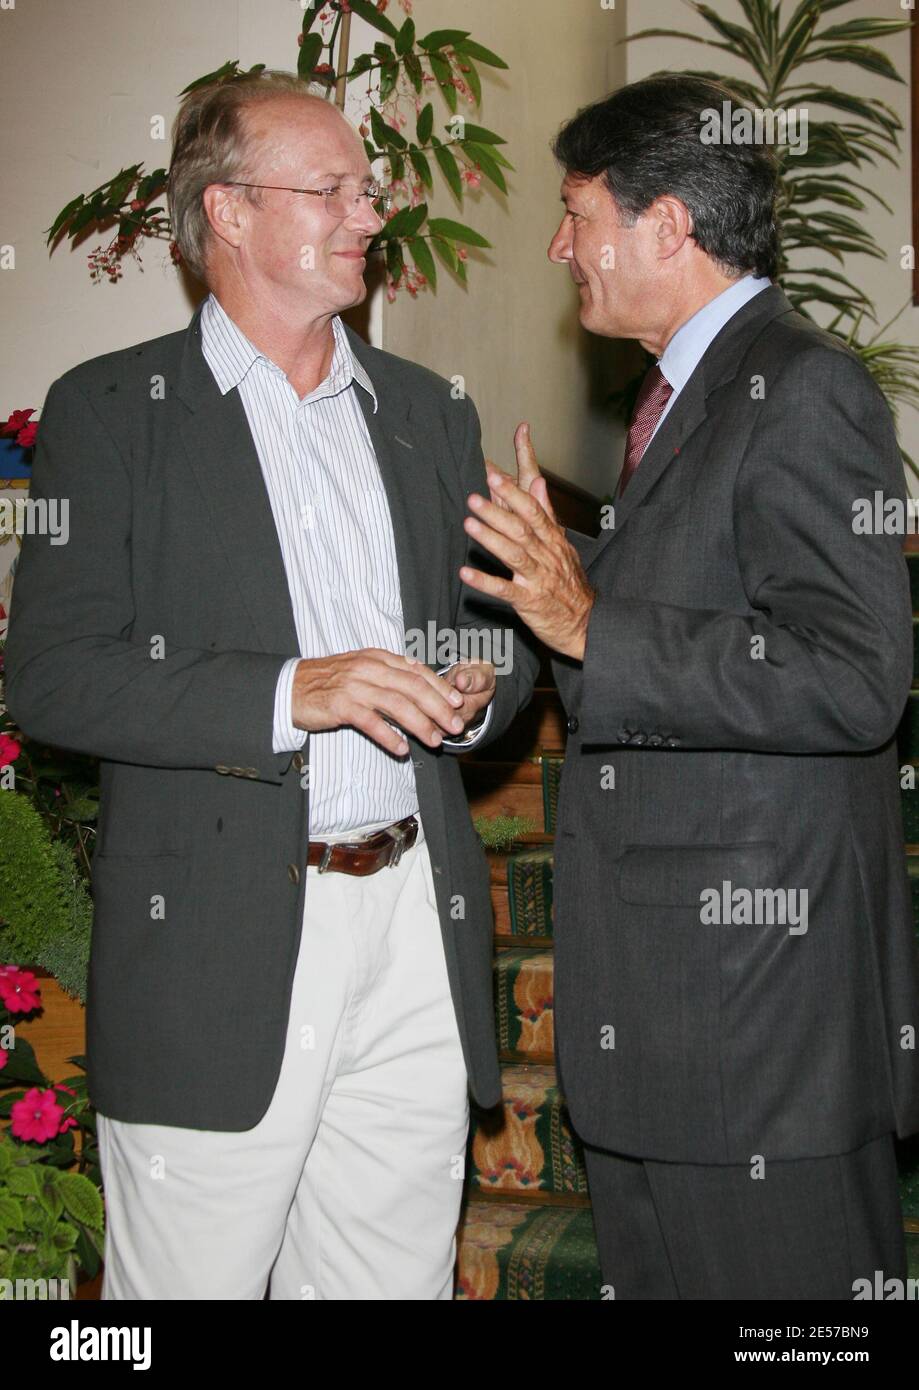 US actor William Hurt (L,) receives the medal of Deauville city 'Medaille de La Ville de Deauville' from by its mayor Philippe Augier, at Deauville's city hall, France, on September 11, 2008. Photo by Dennis Guignebourg/ABACAPRESS.COM Stock Photo